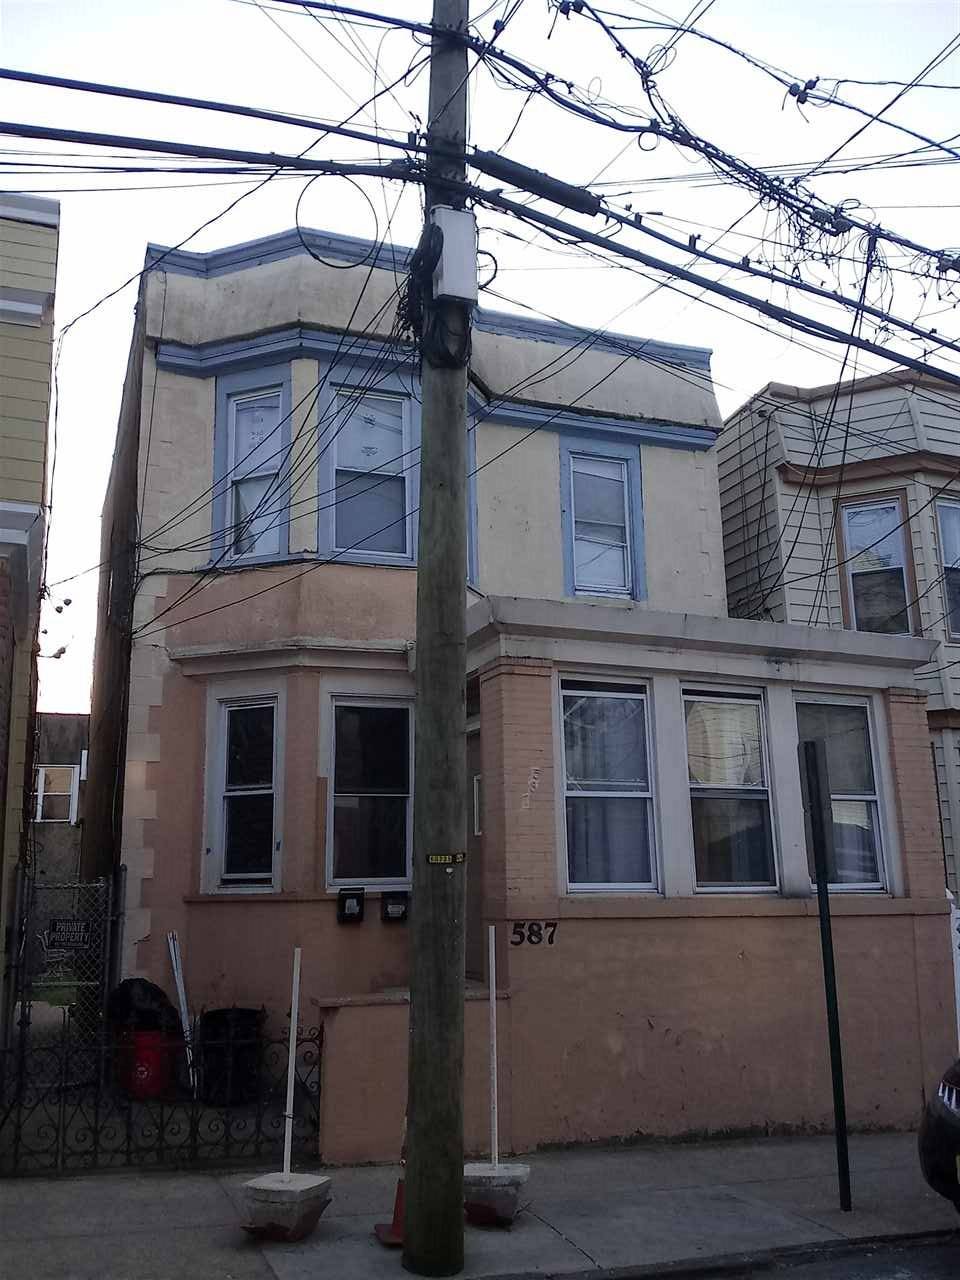 587 57TH ST Multi-Family New Jersey